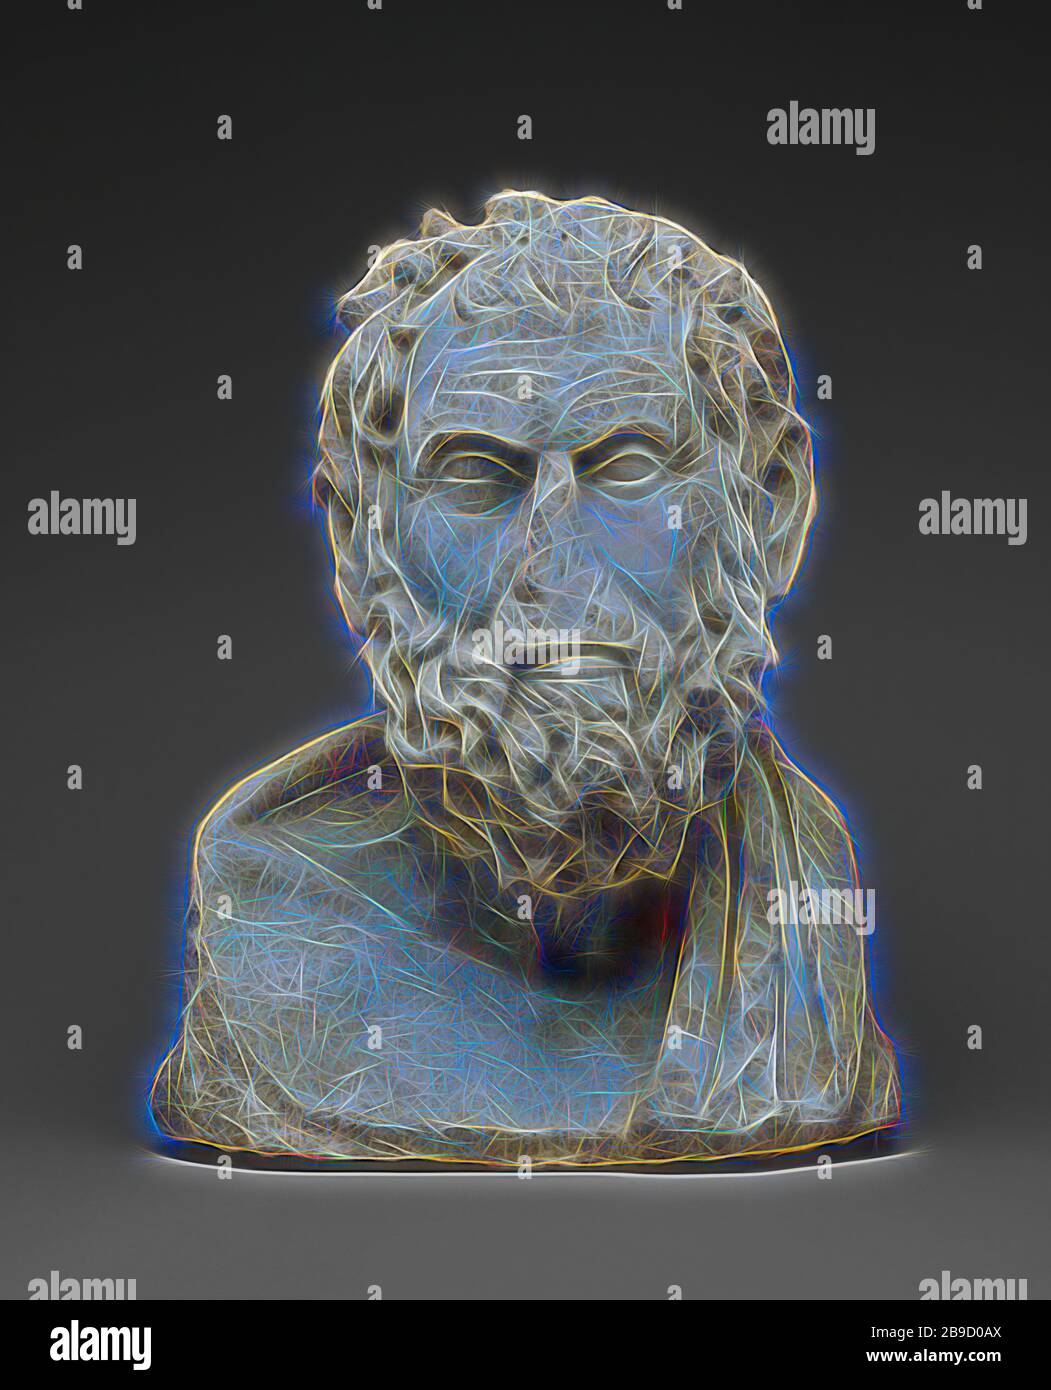 Herm Bust of a Greek Philosopher, Roman Empire, late 1st century, Italian marble, 39 × 31.3 × 19.5 cm (15 3,8 × 12 5,16 × 7 11,16 in, Reimagined by Gibon, design of warm cheerful glowing of brightness and light rays radiance. Classic art reinvented with a modern twist. Photography inspired by futurism, embracing dynamic energy of modern technology, movement, speed and revolutionize culture. Stock Photo